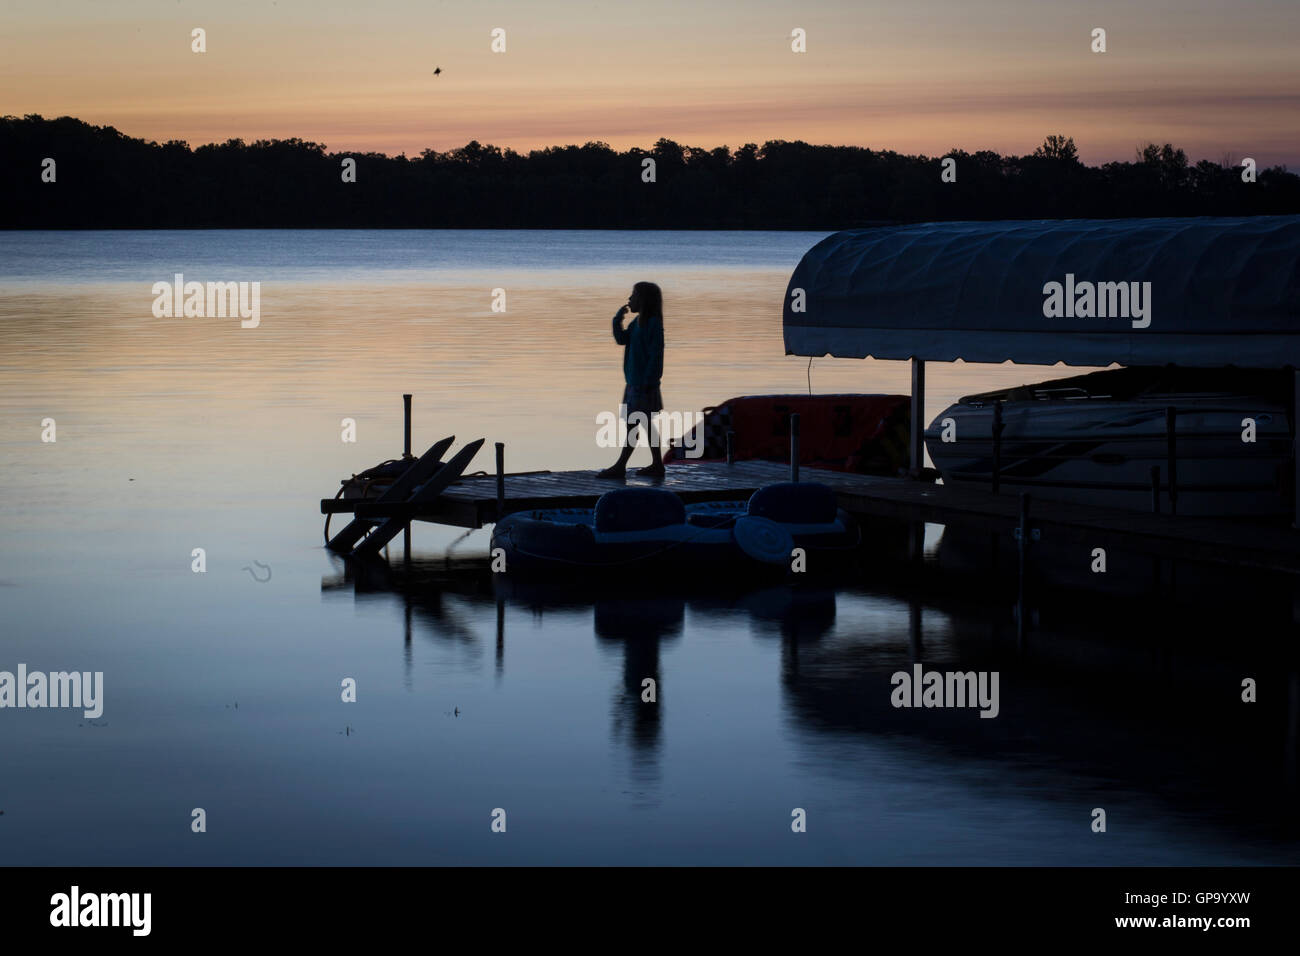 A young girl stands on a dock as the sun rises over Little Pine Lake near Aitkin, Minnesota, USA August  25, 2016 Stock Photo